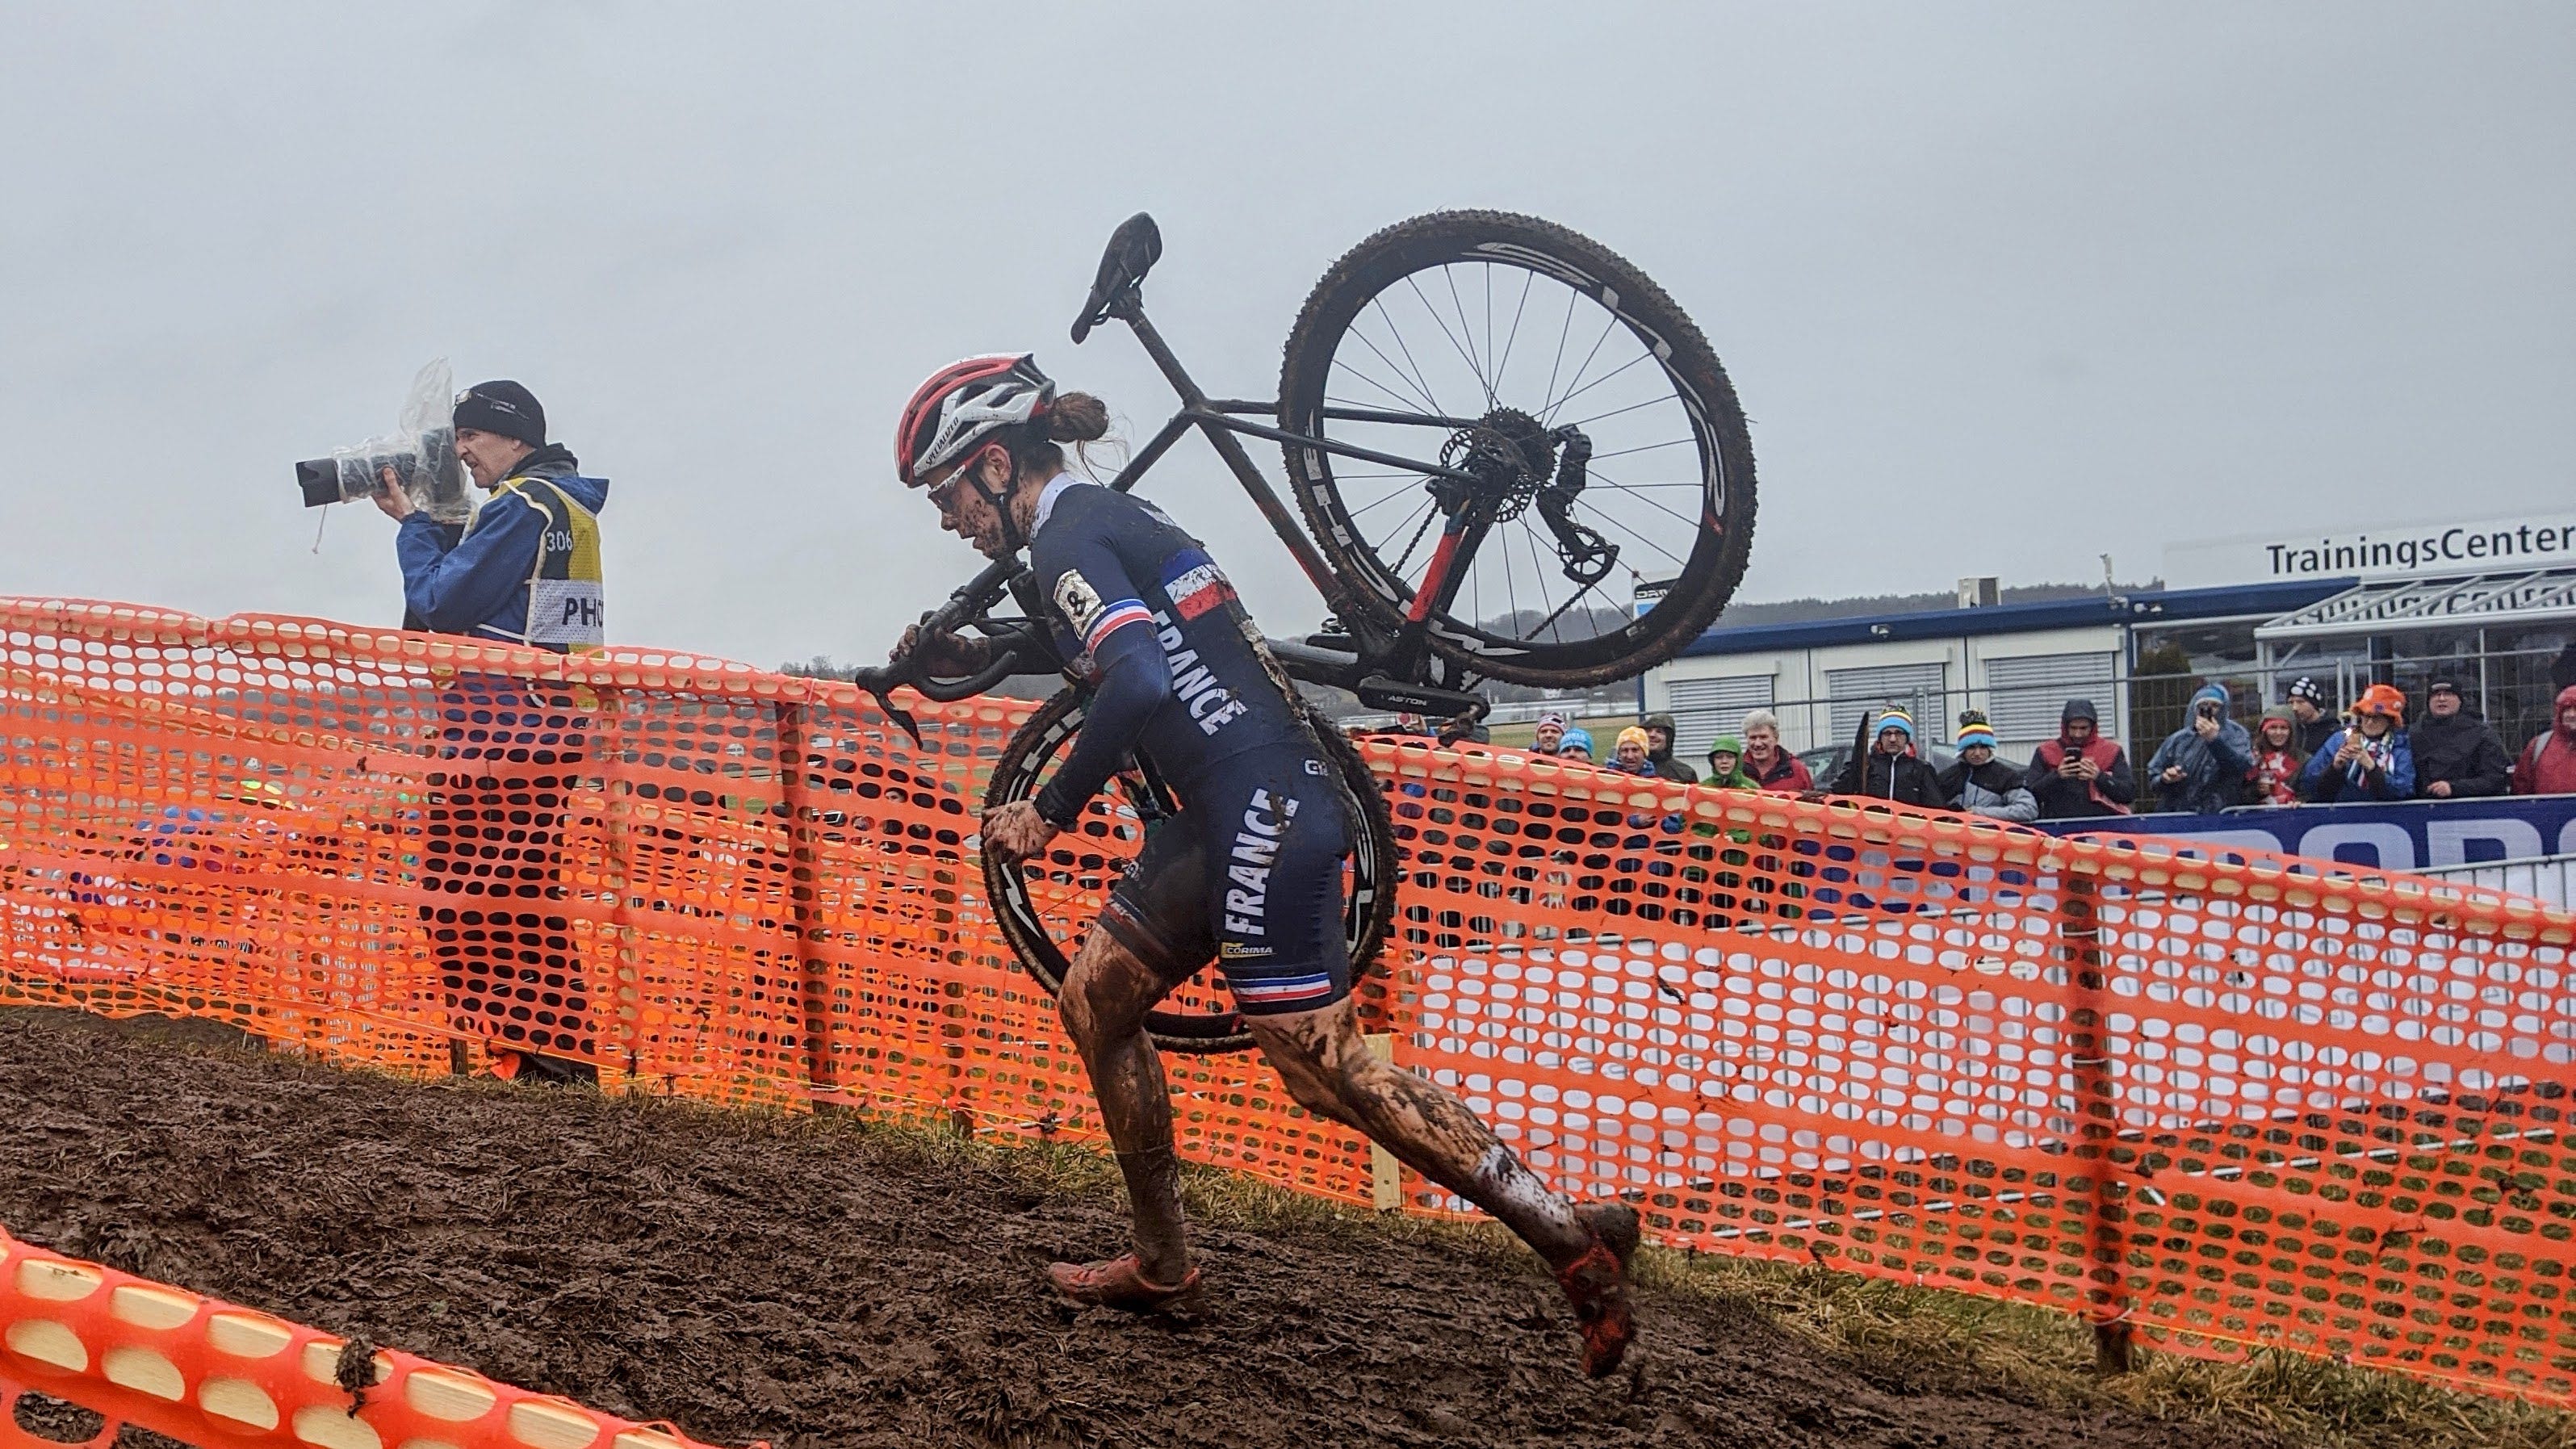 A female cyclist runs up a muddy hill, carrying her bicycle on her right shoulder at a cyclo-cross race. There is an orange plastic fence separating her from the crowd